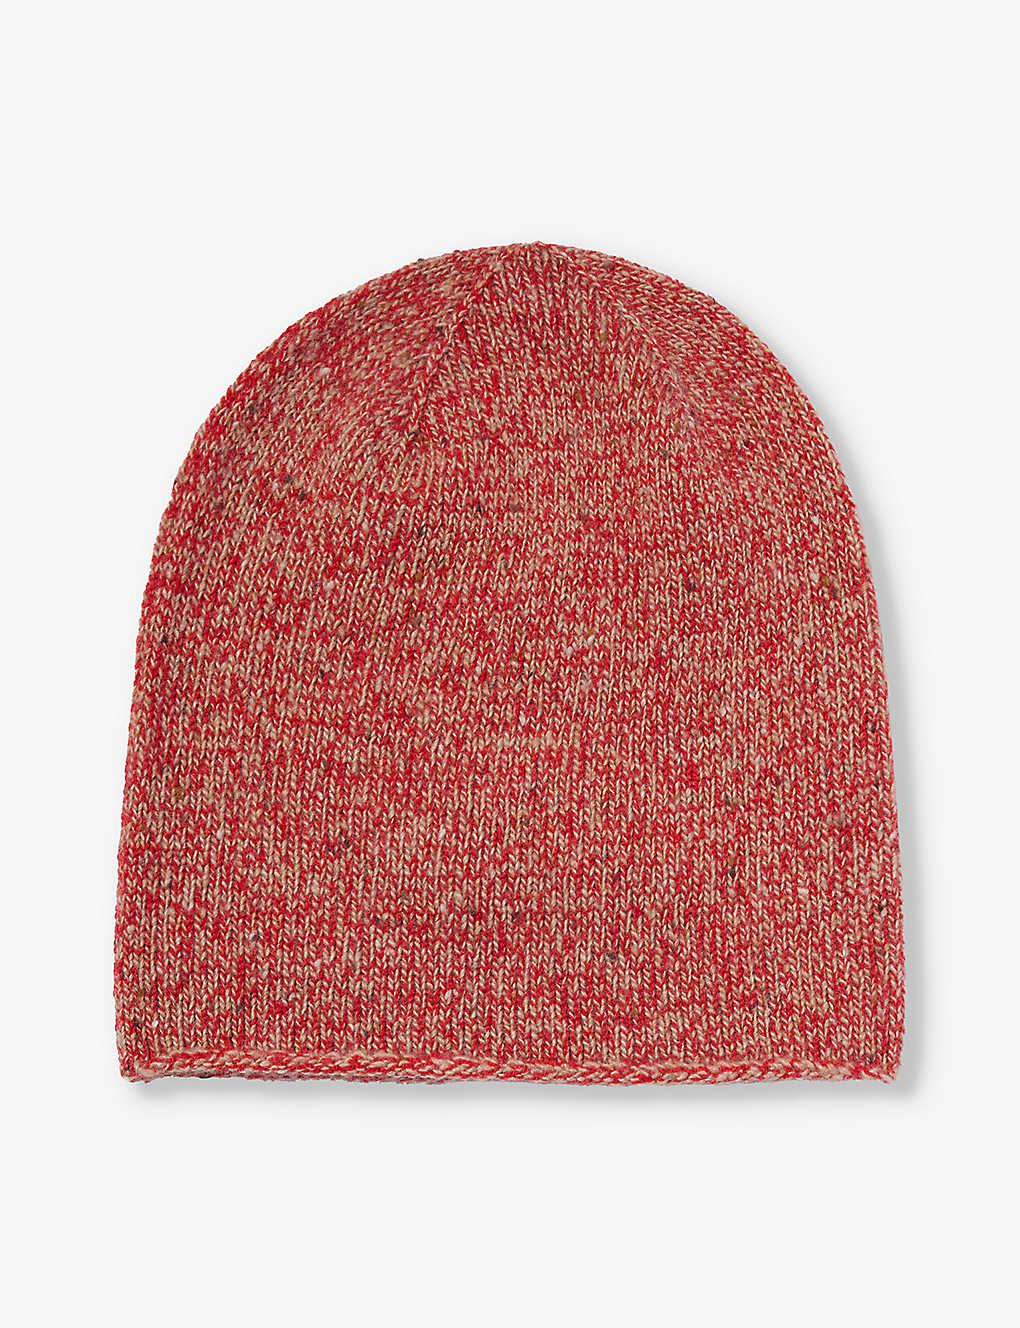 Johnstons Speckled Cashmere Beanie In Camel Donegal/red Marl